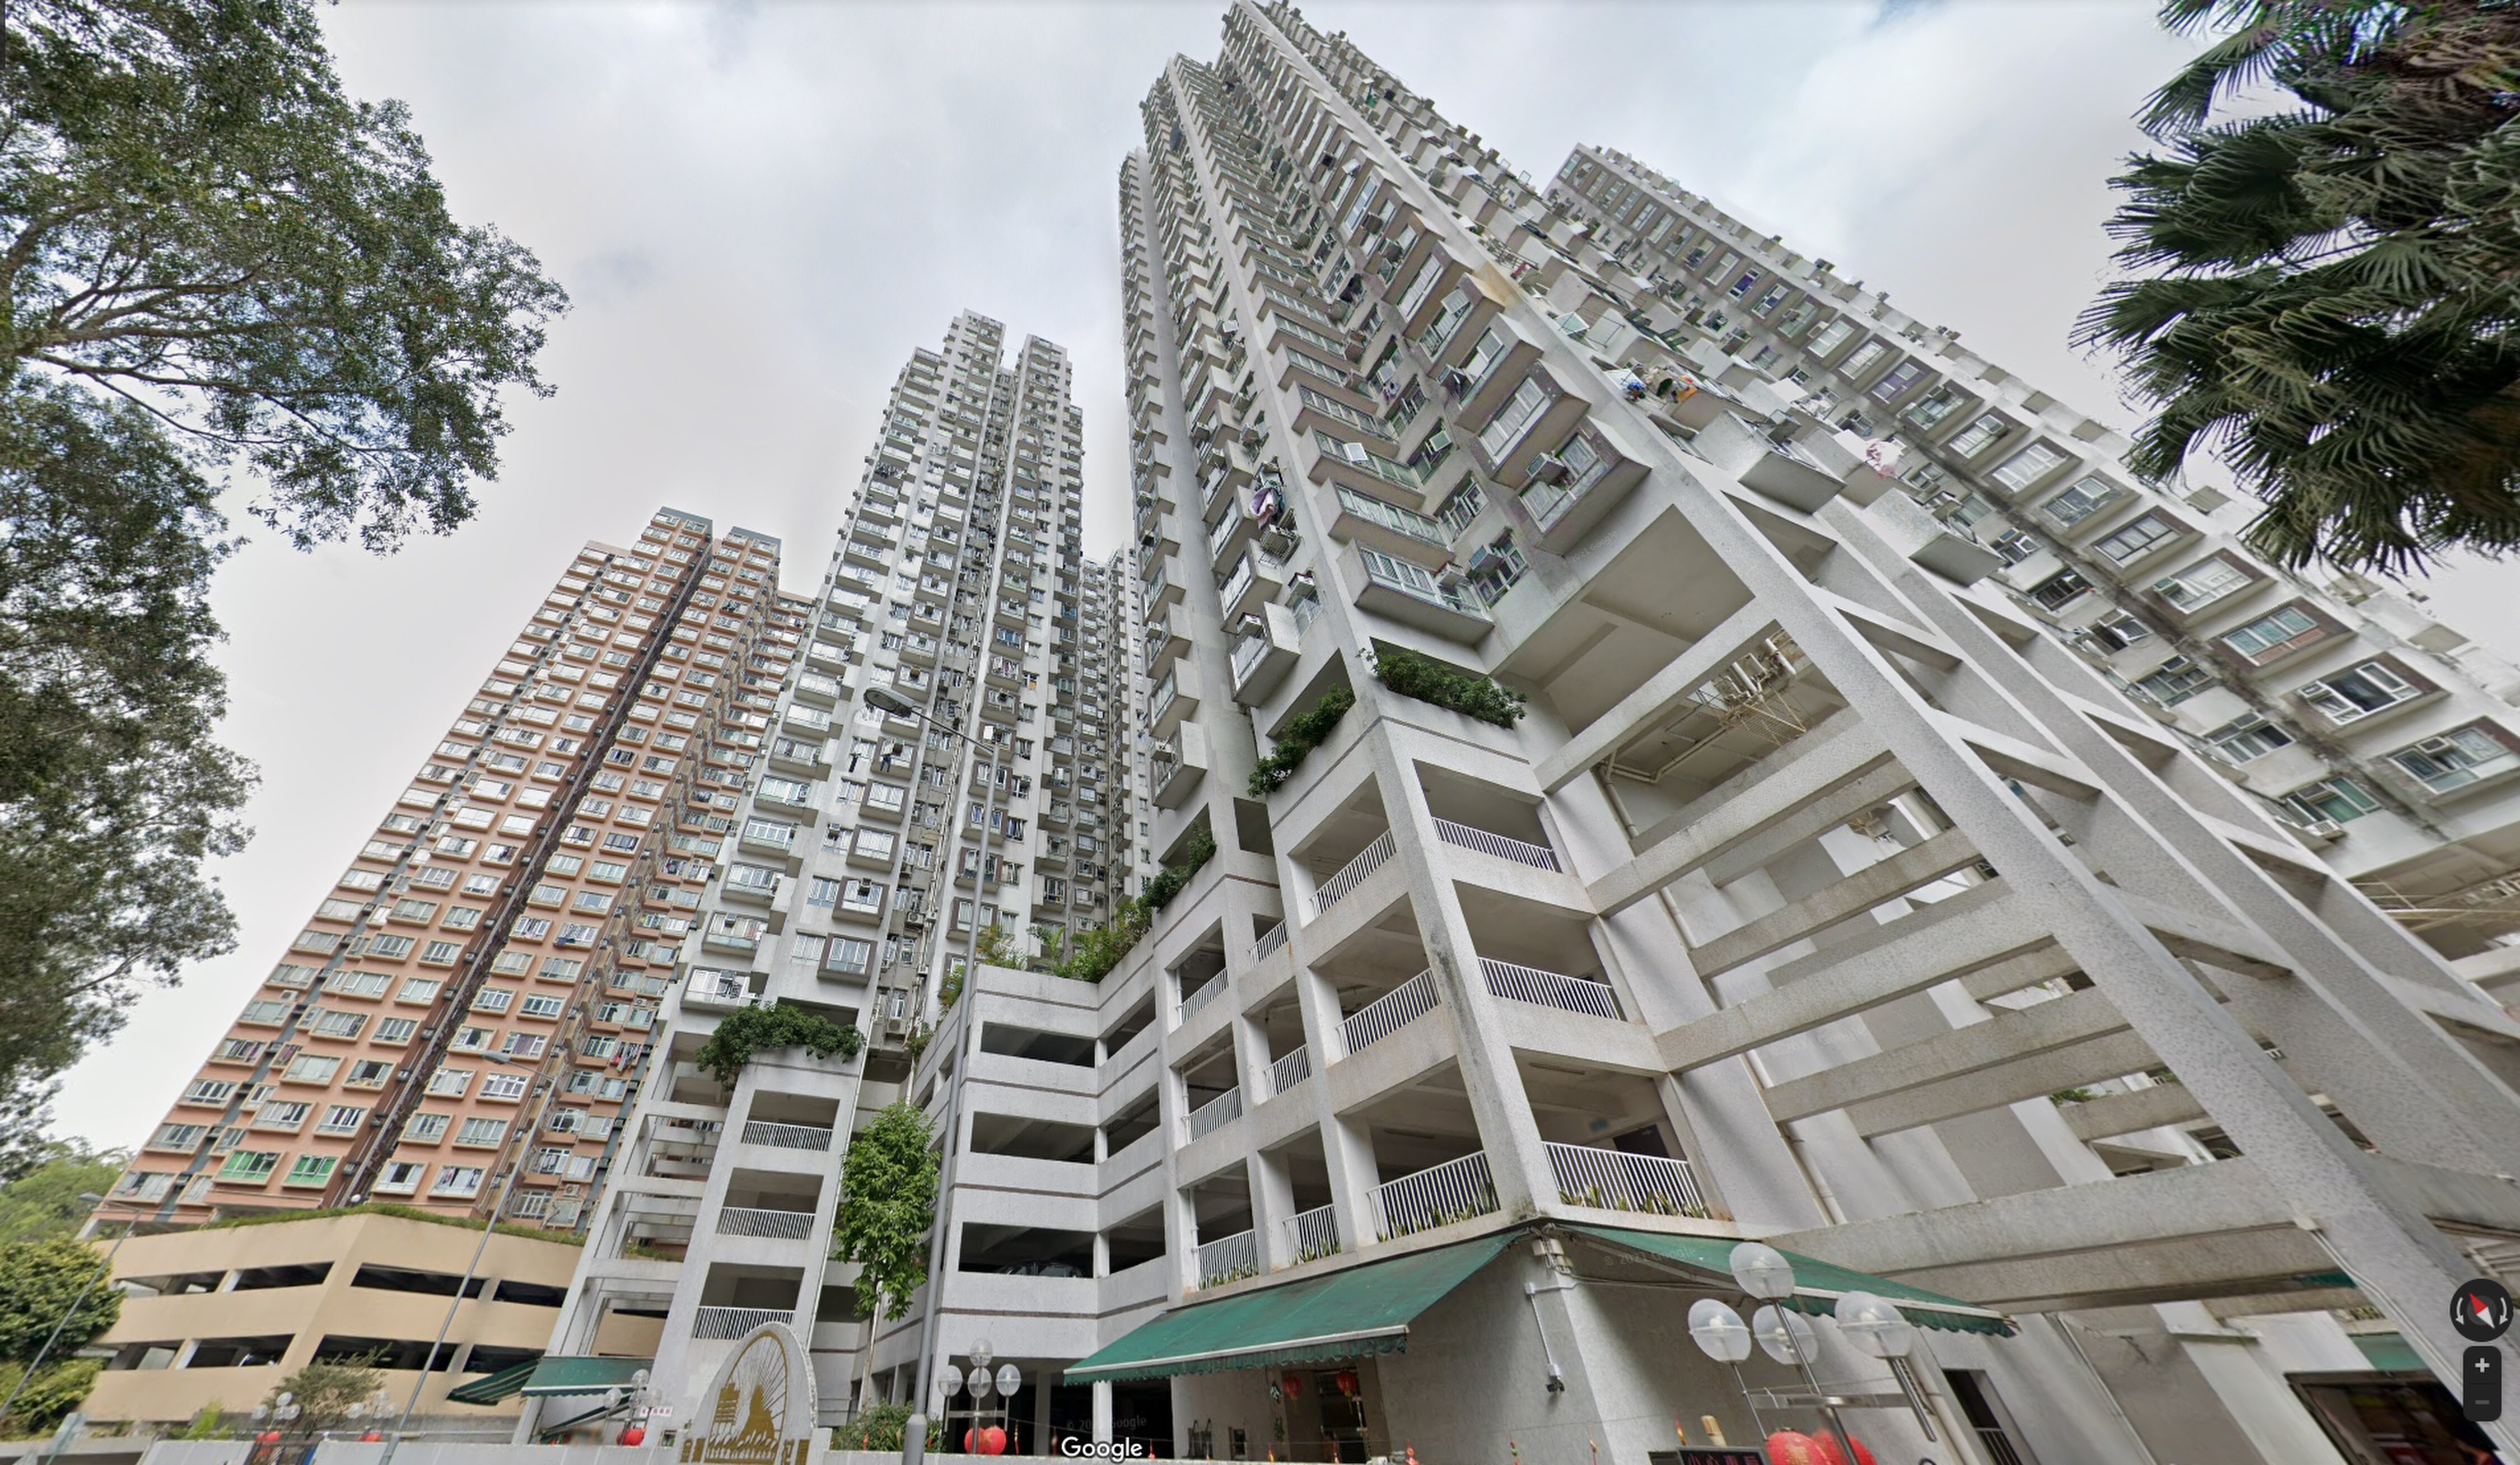 Compulsory testing was carried out at Golden Lion Garden in Tai Wai. Photo: Google